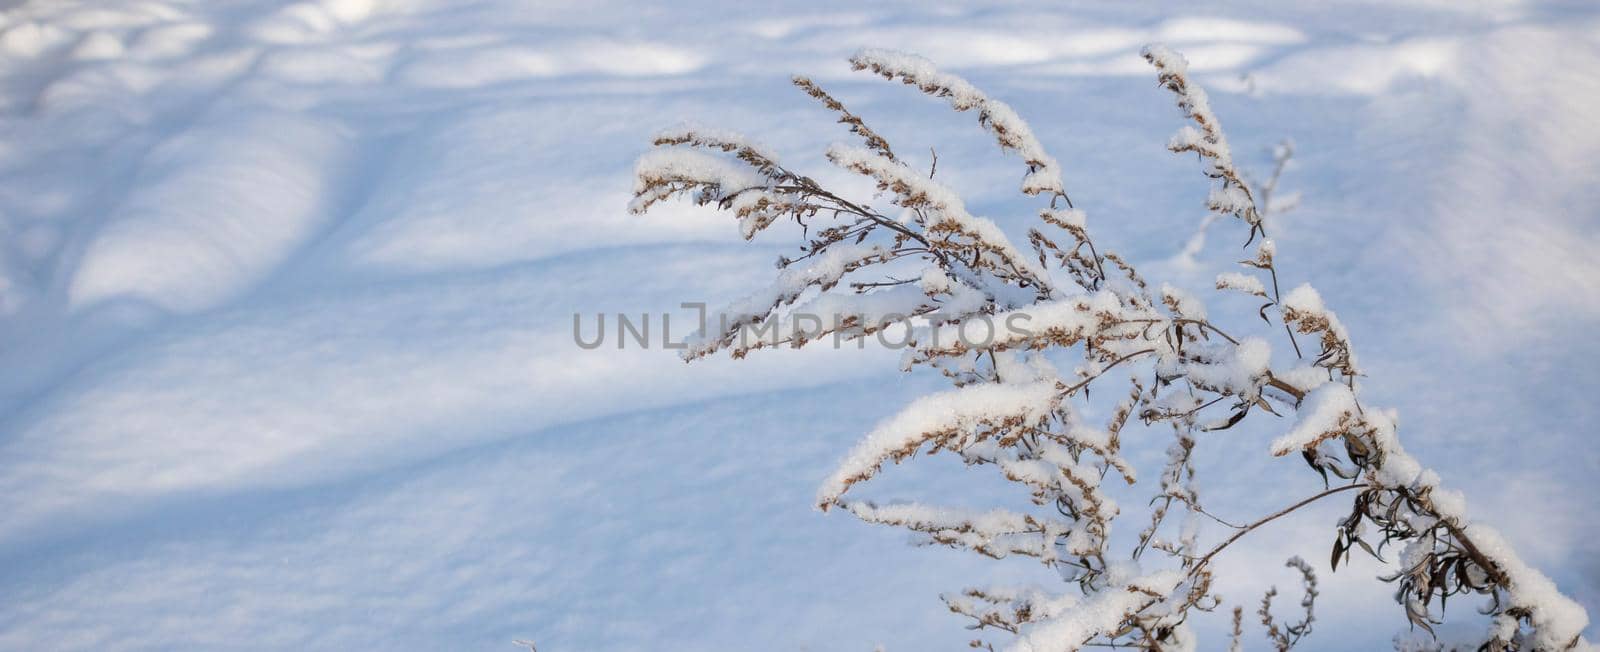 A dry branch of sagebrush in fluffy white snow after a snowfall by lapushka62